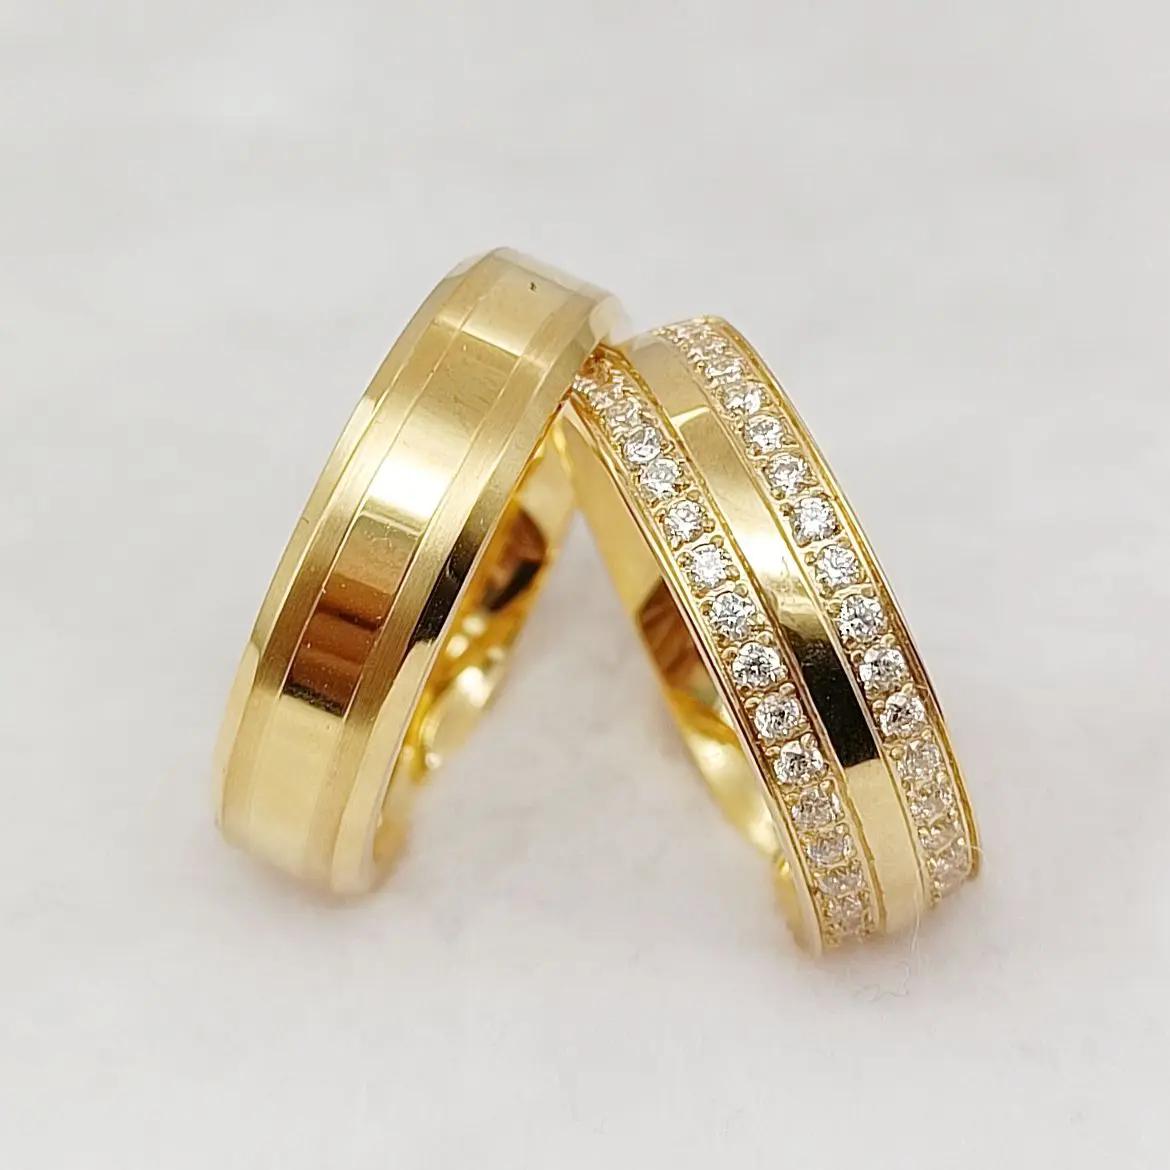 High Quality Couples Wedding Rings Man whole Lovers 18k gold plated stainless steel jewelry cz Diamond finger rings